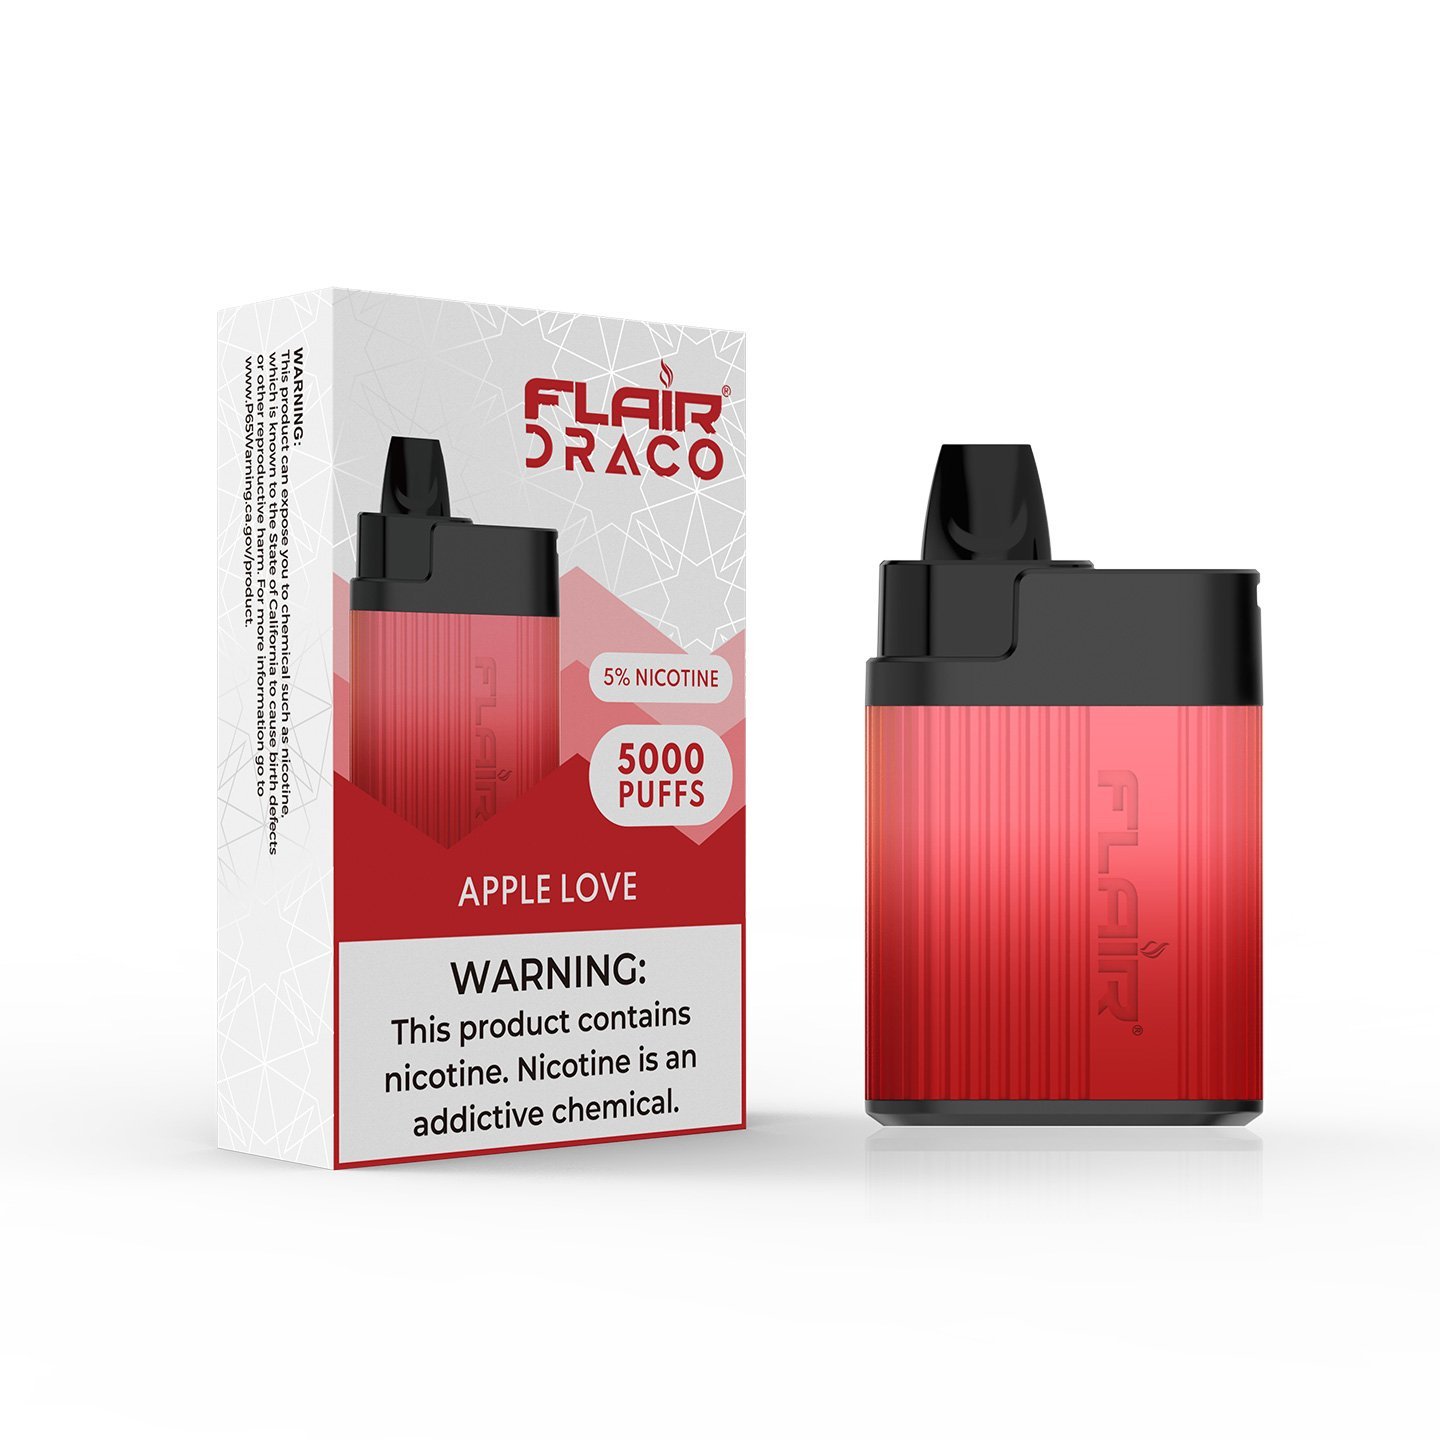 Flair Draco Disposable Devices (Apple Love - 5000 Puffs)